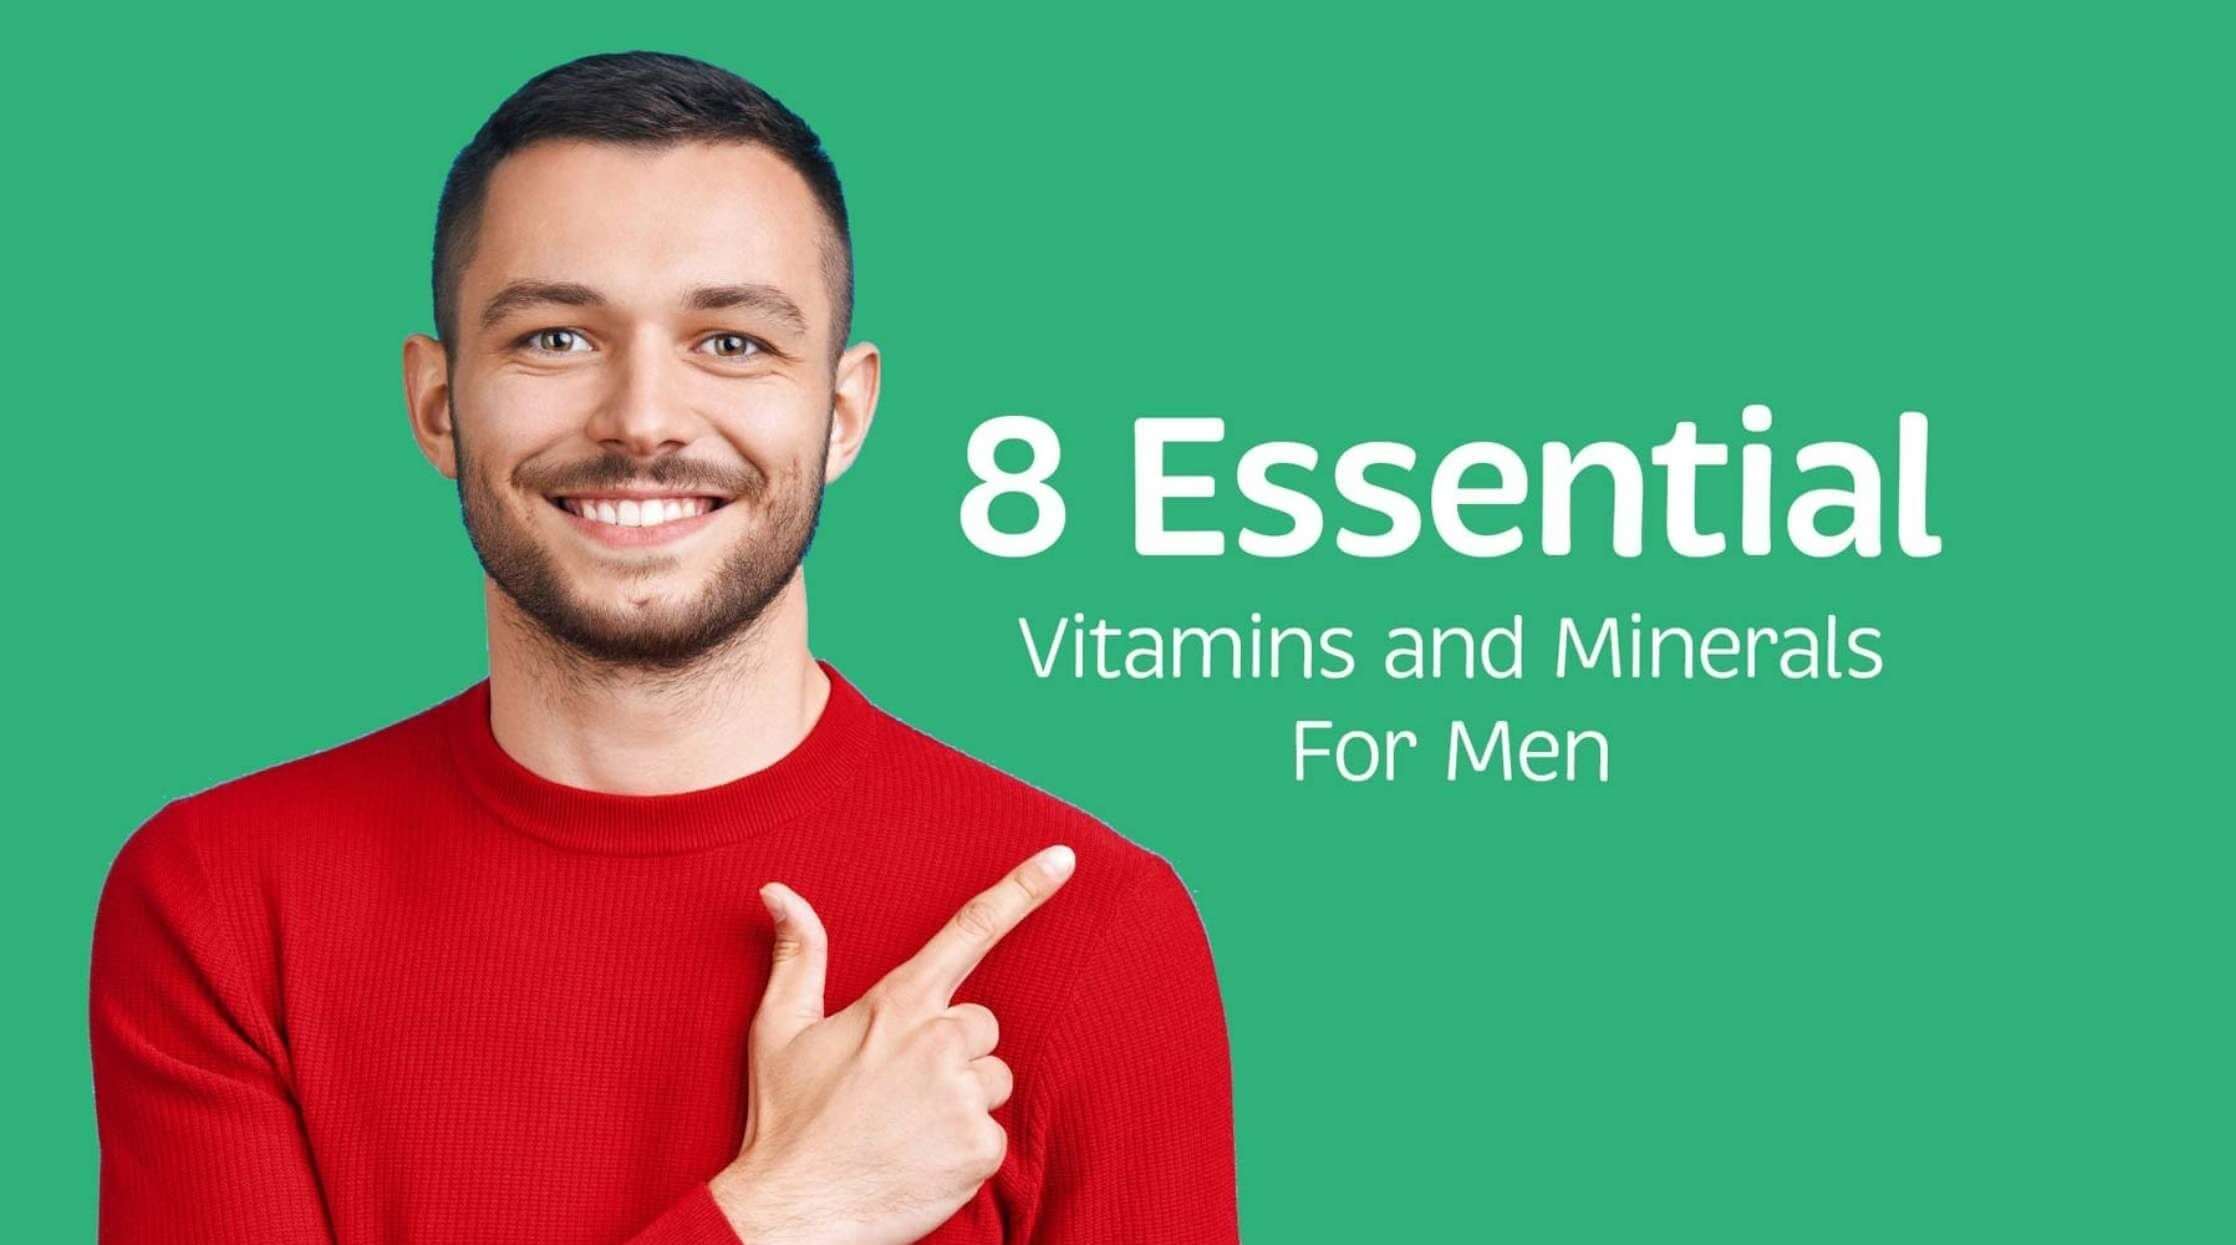 8 Essential Vitamins and Minerals for Men